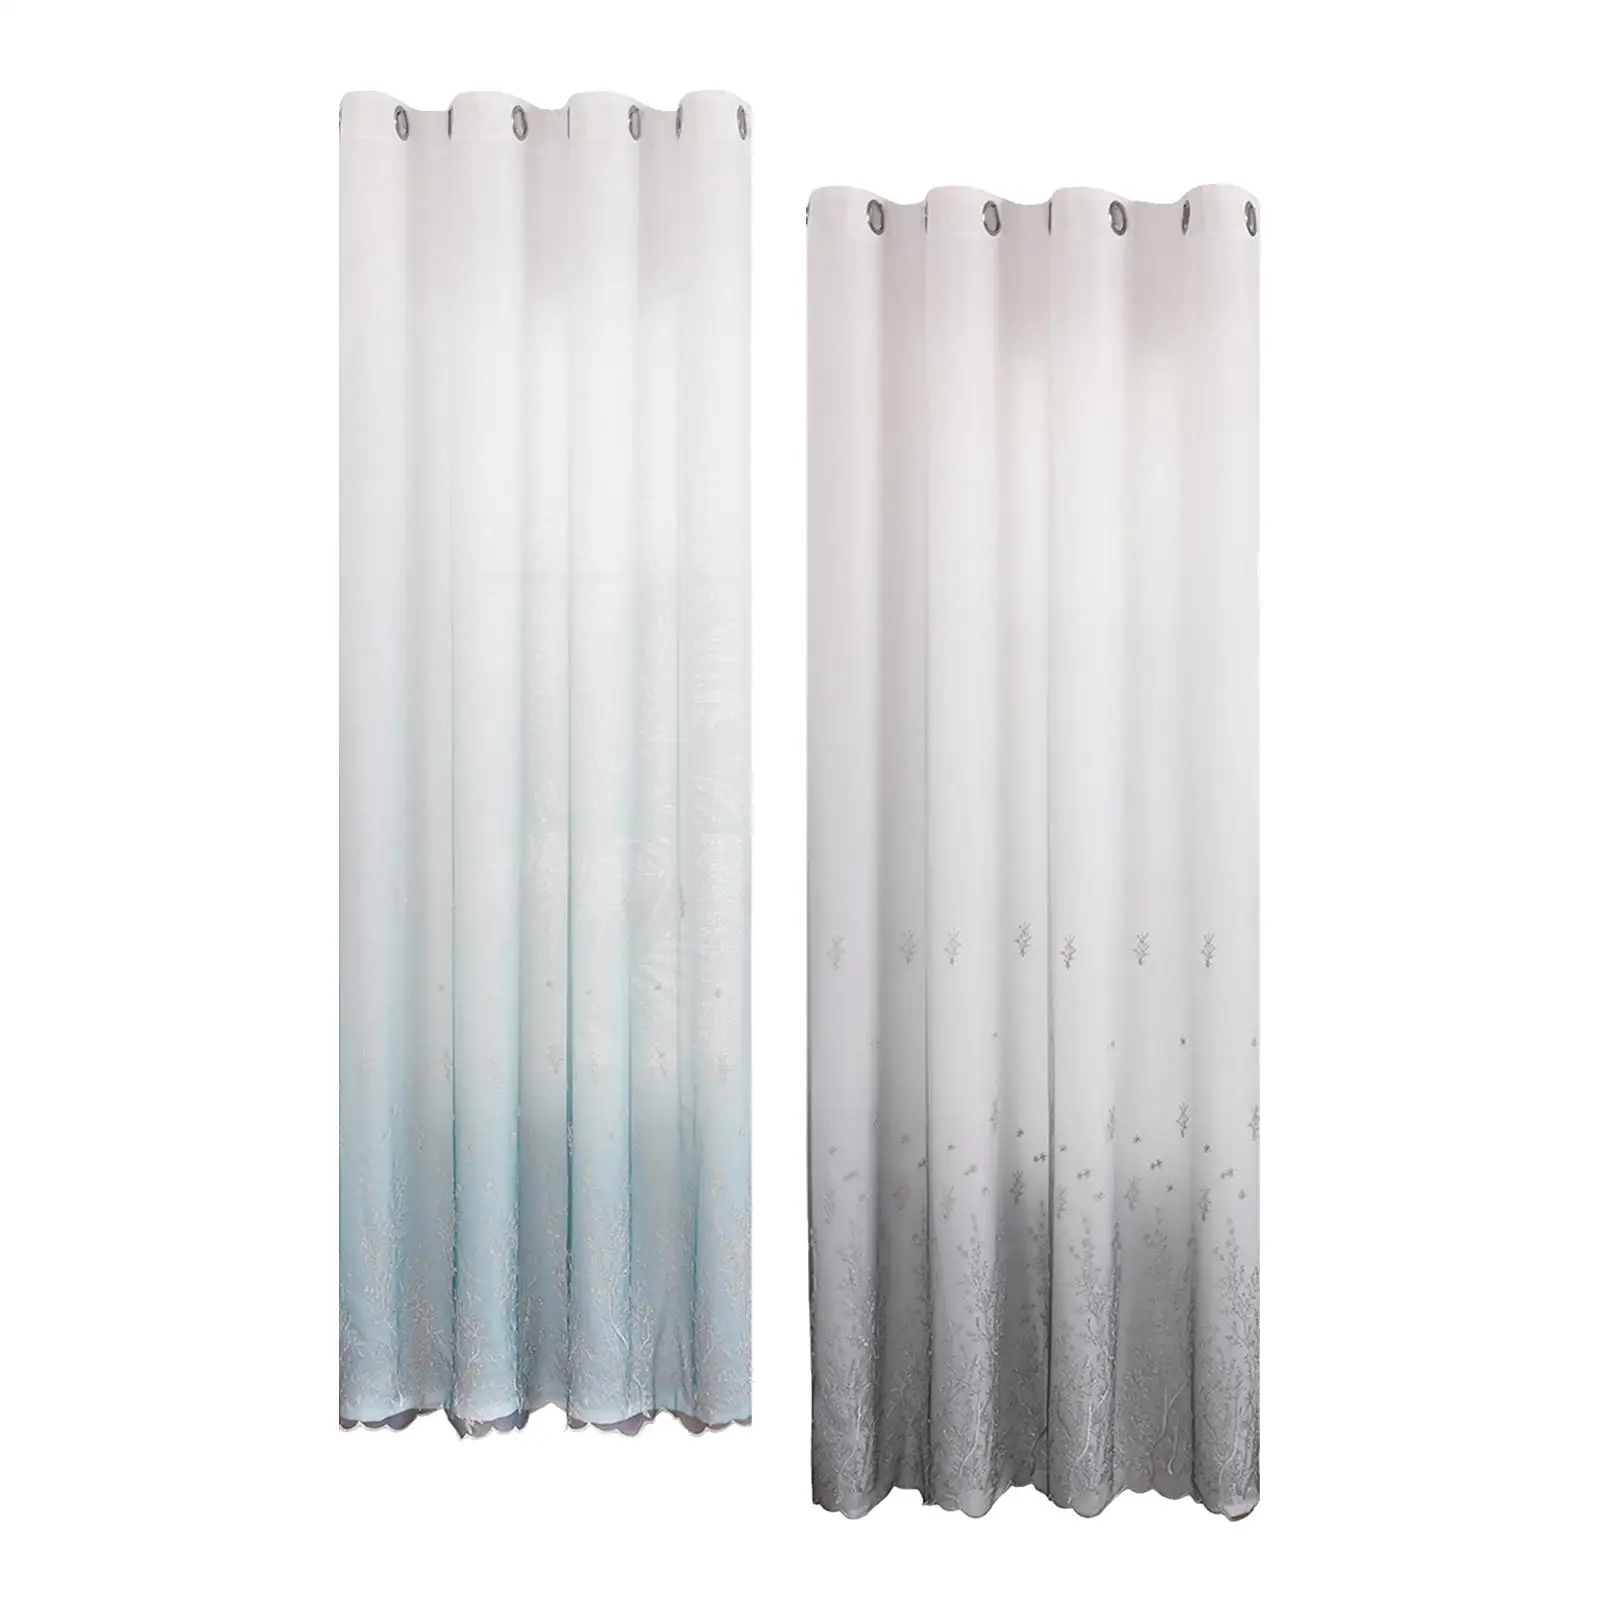 2Pcs Modern Blackout Curtains Window Draperies Darkening Noise Reduction Gauze Integrated Grommet Curtain for Bedroom Home